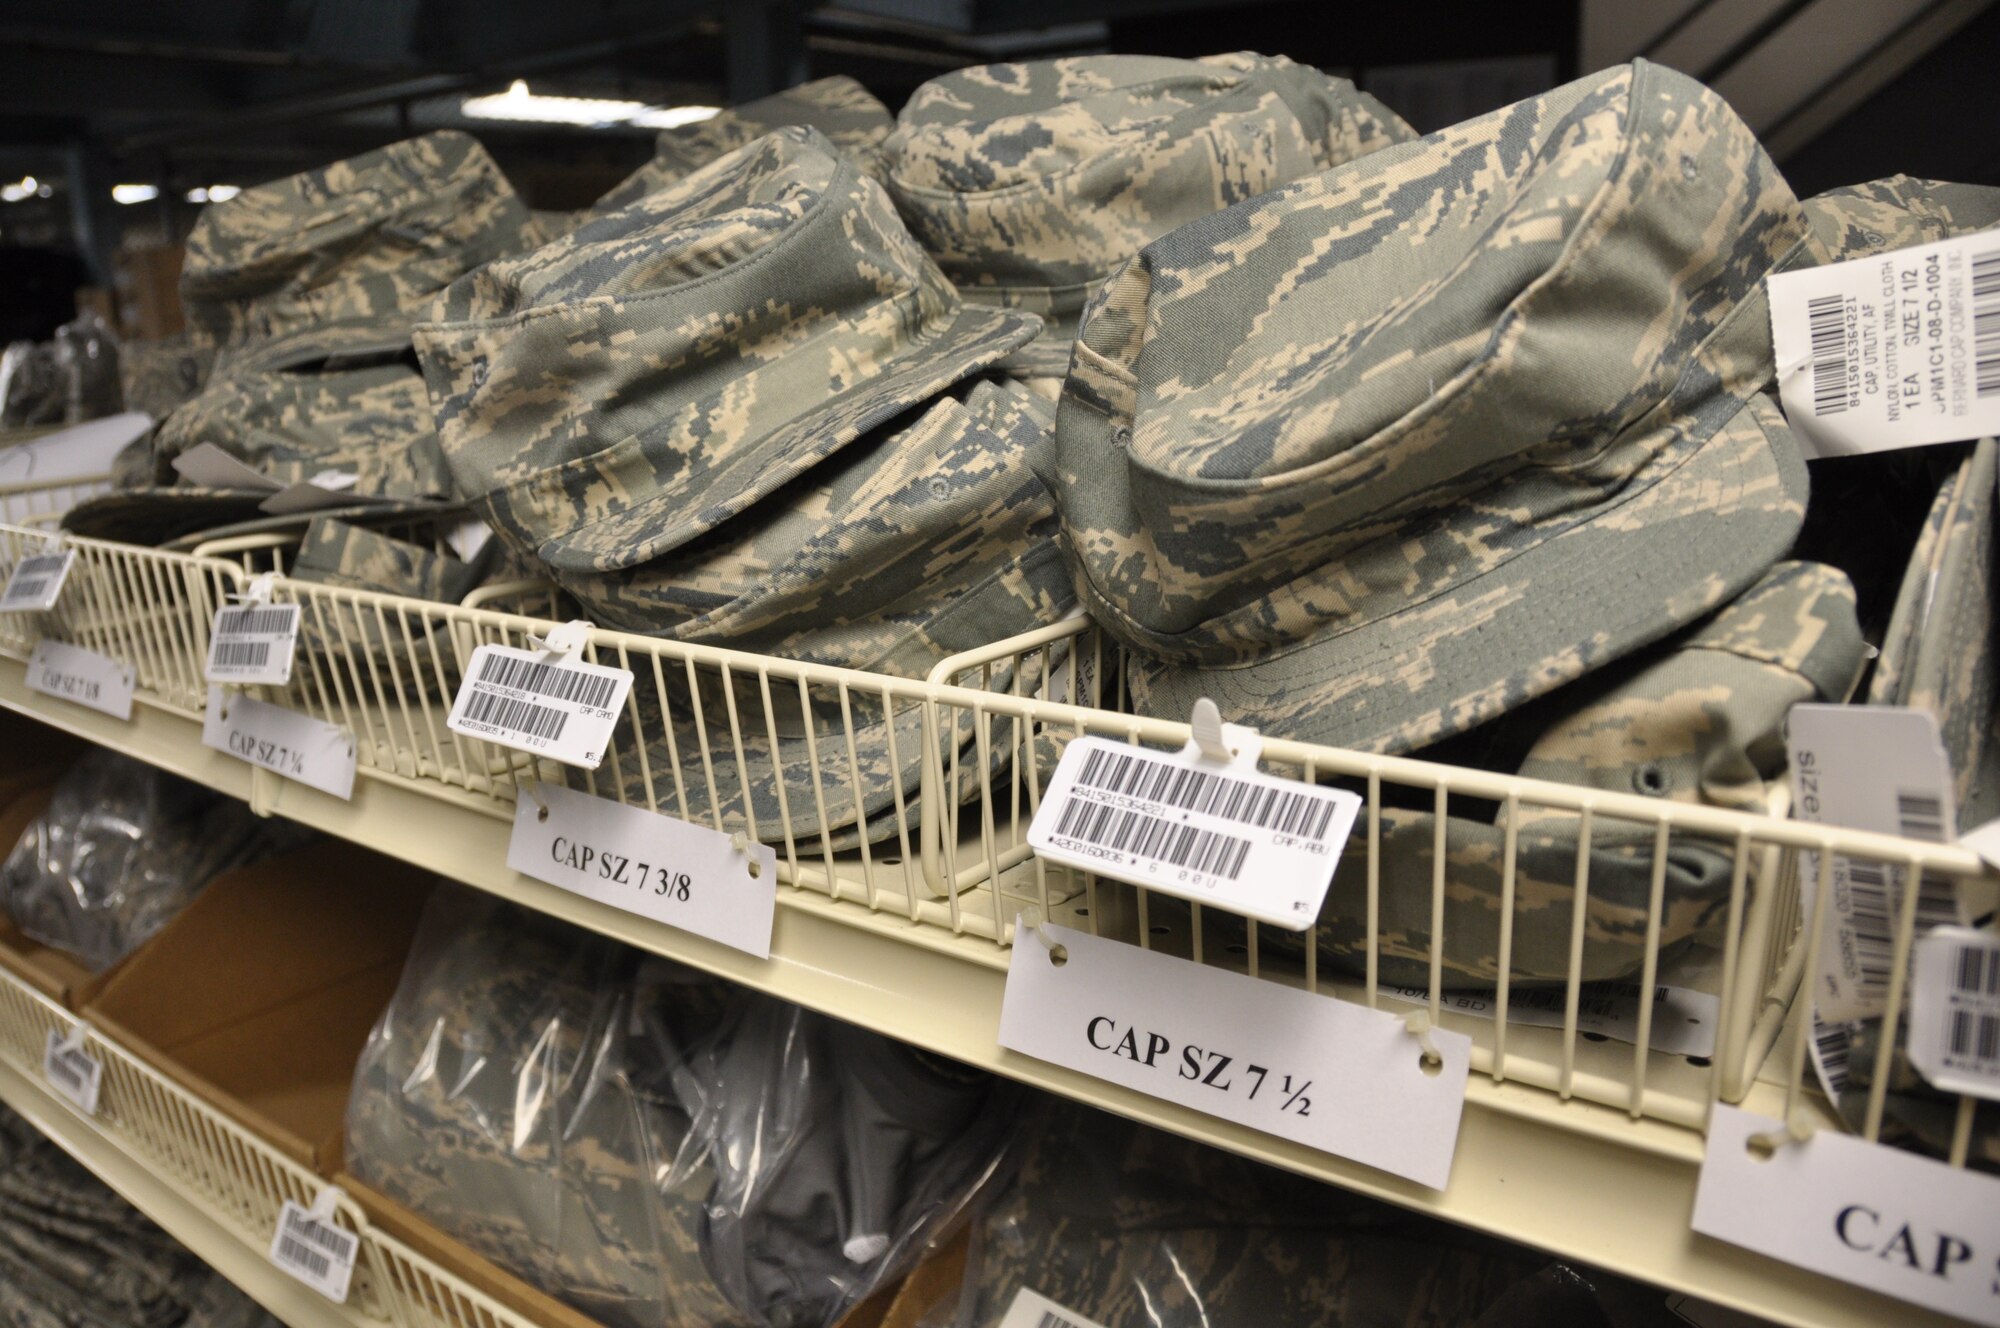 ABU patrol caps fill the shelves in the supply warehouse at the 128th Air Refueling Wing. (US Air Force Photo by: SSgt Nathan Wallin)